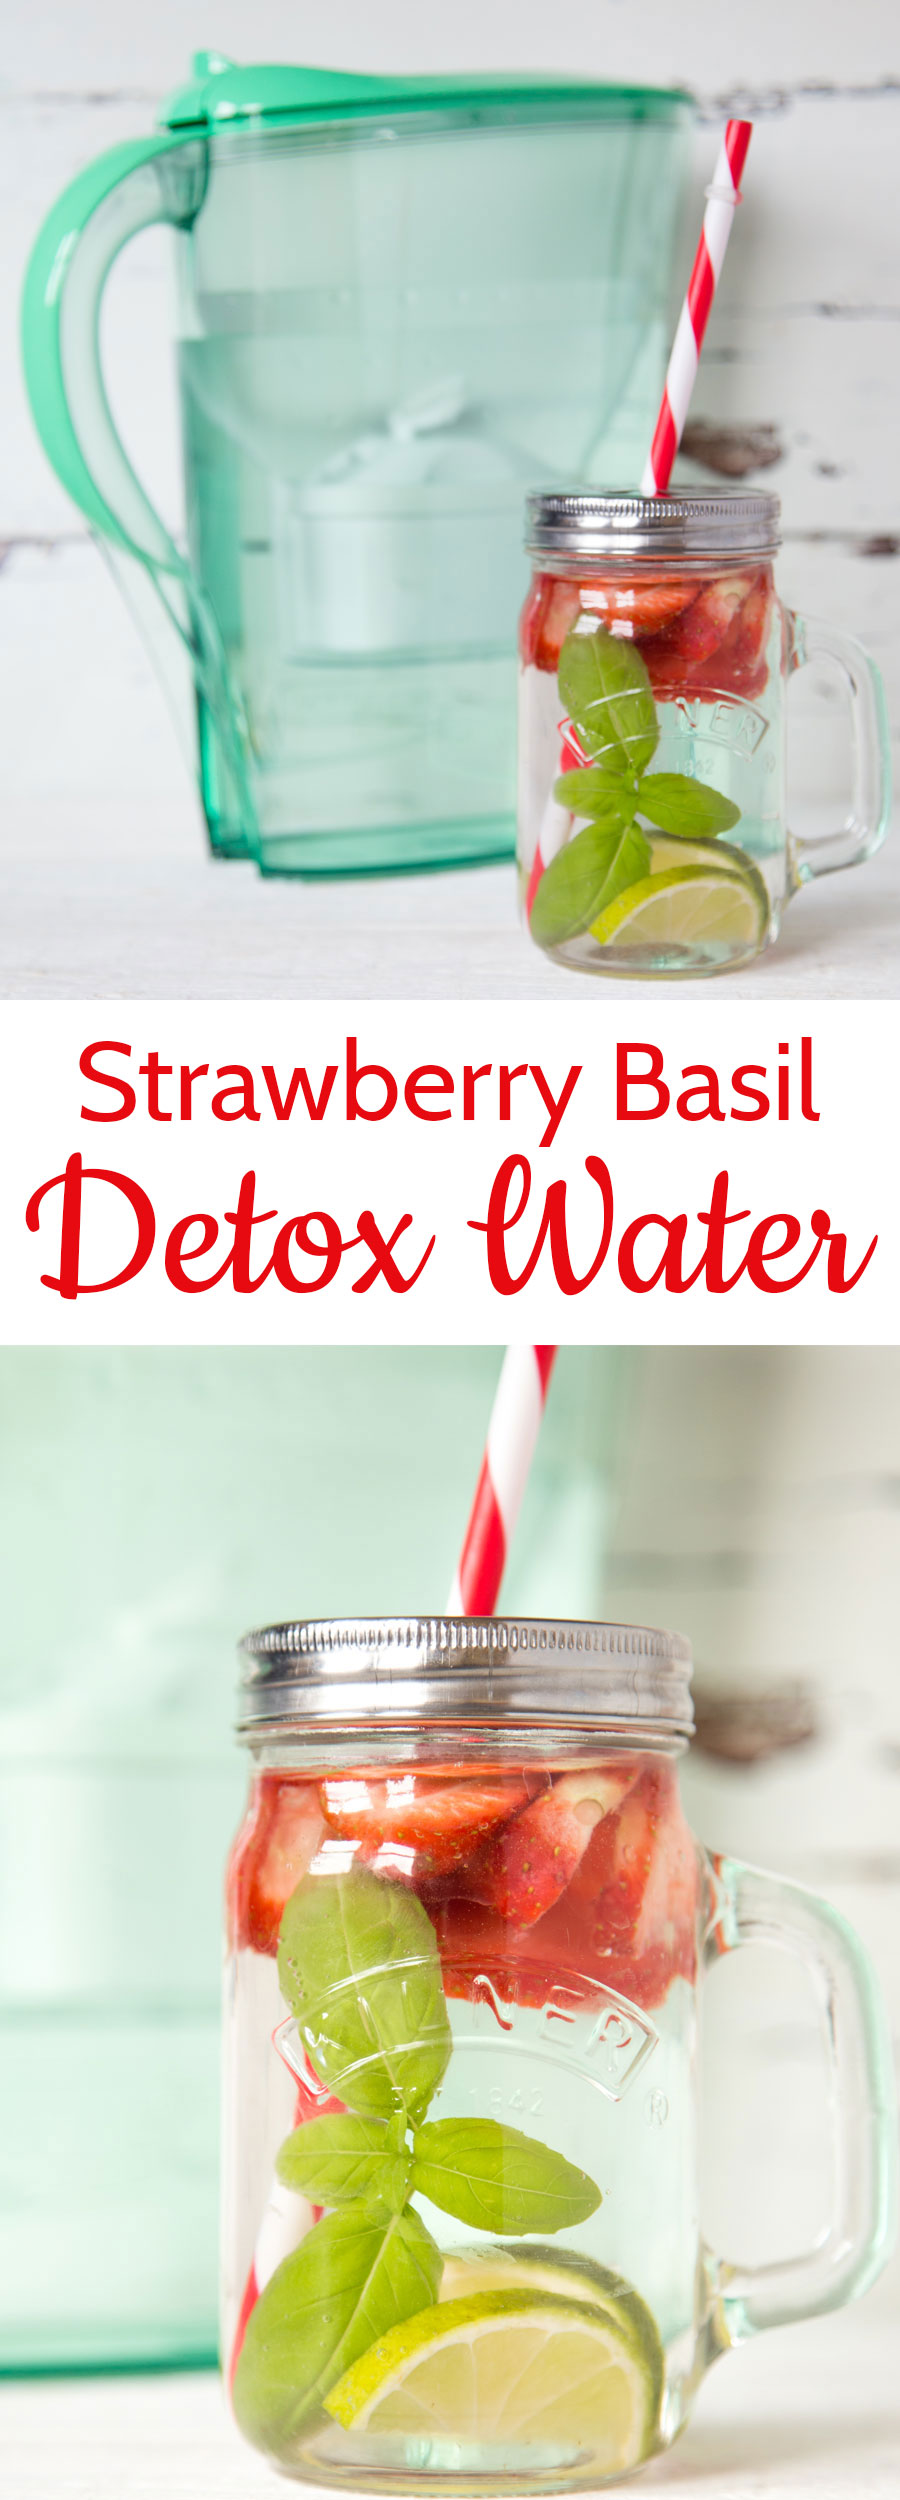 A delicious natural refreshing detox water, perfect for summer, or post workout hydration